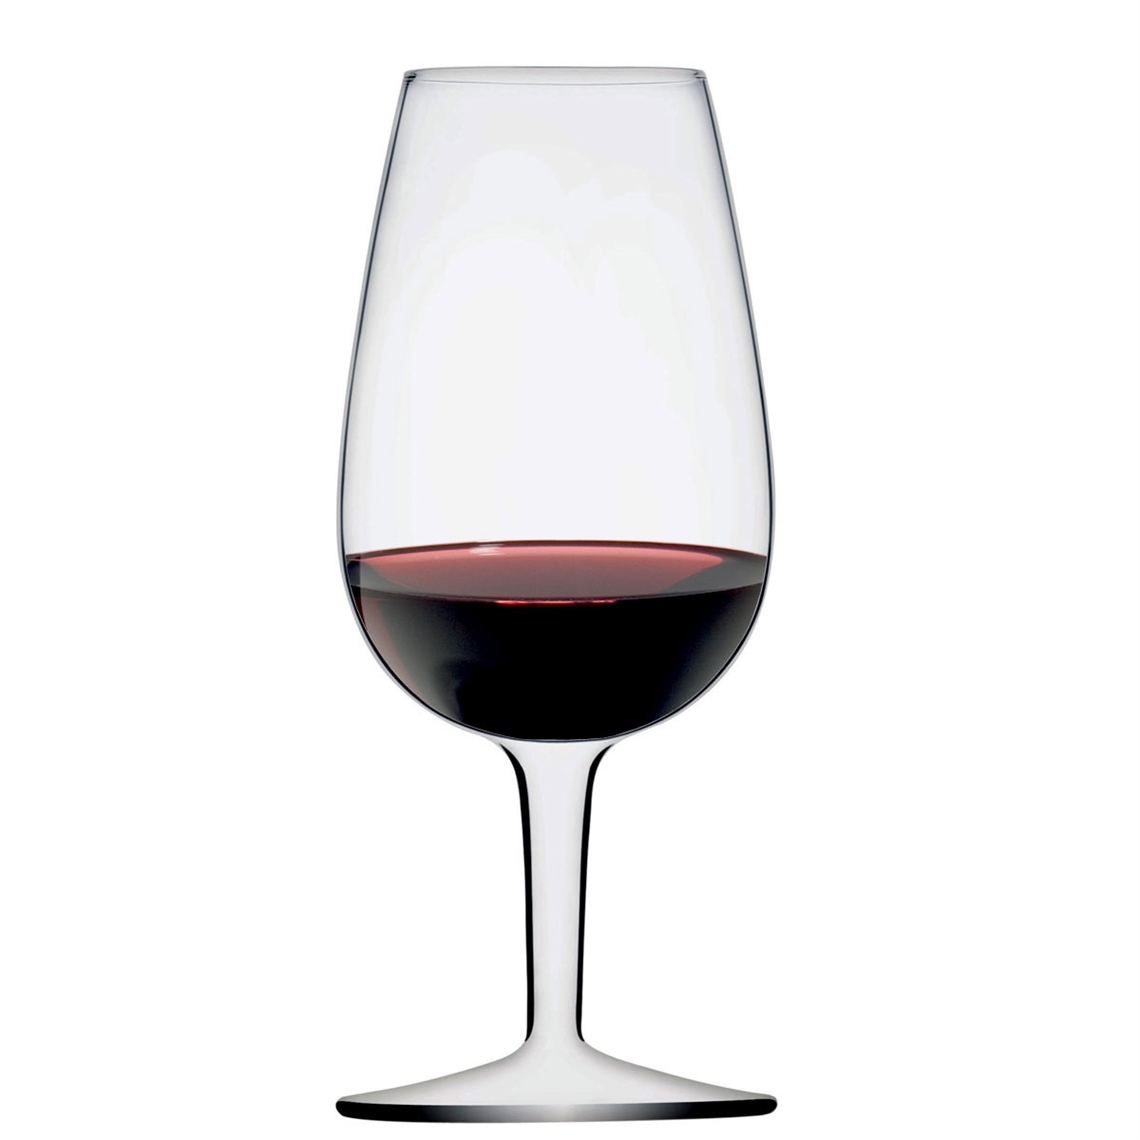 View more wine spittoons from our Wine Tasting Glasses range